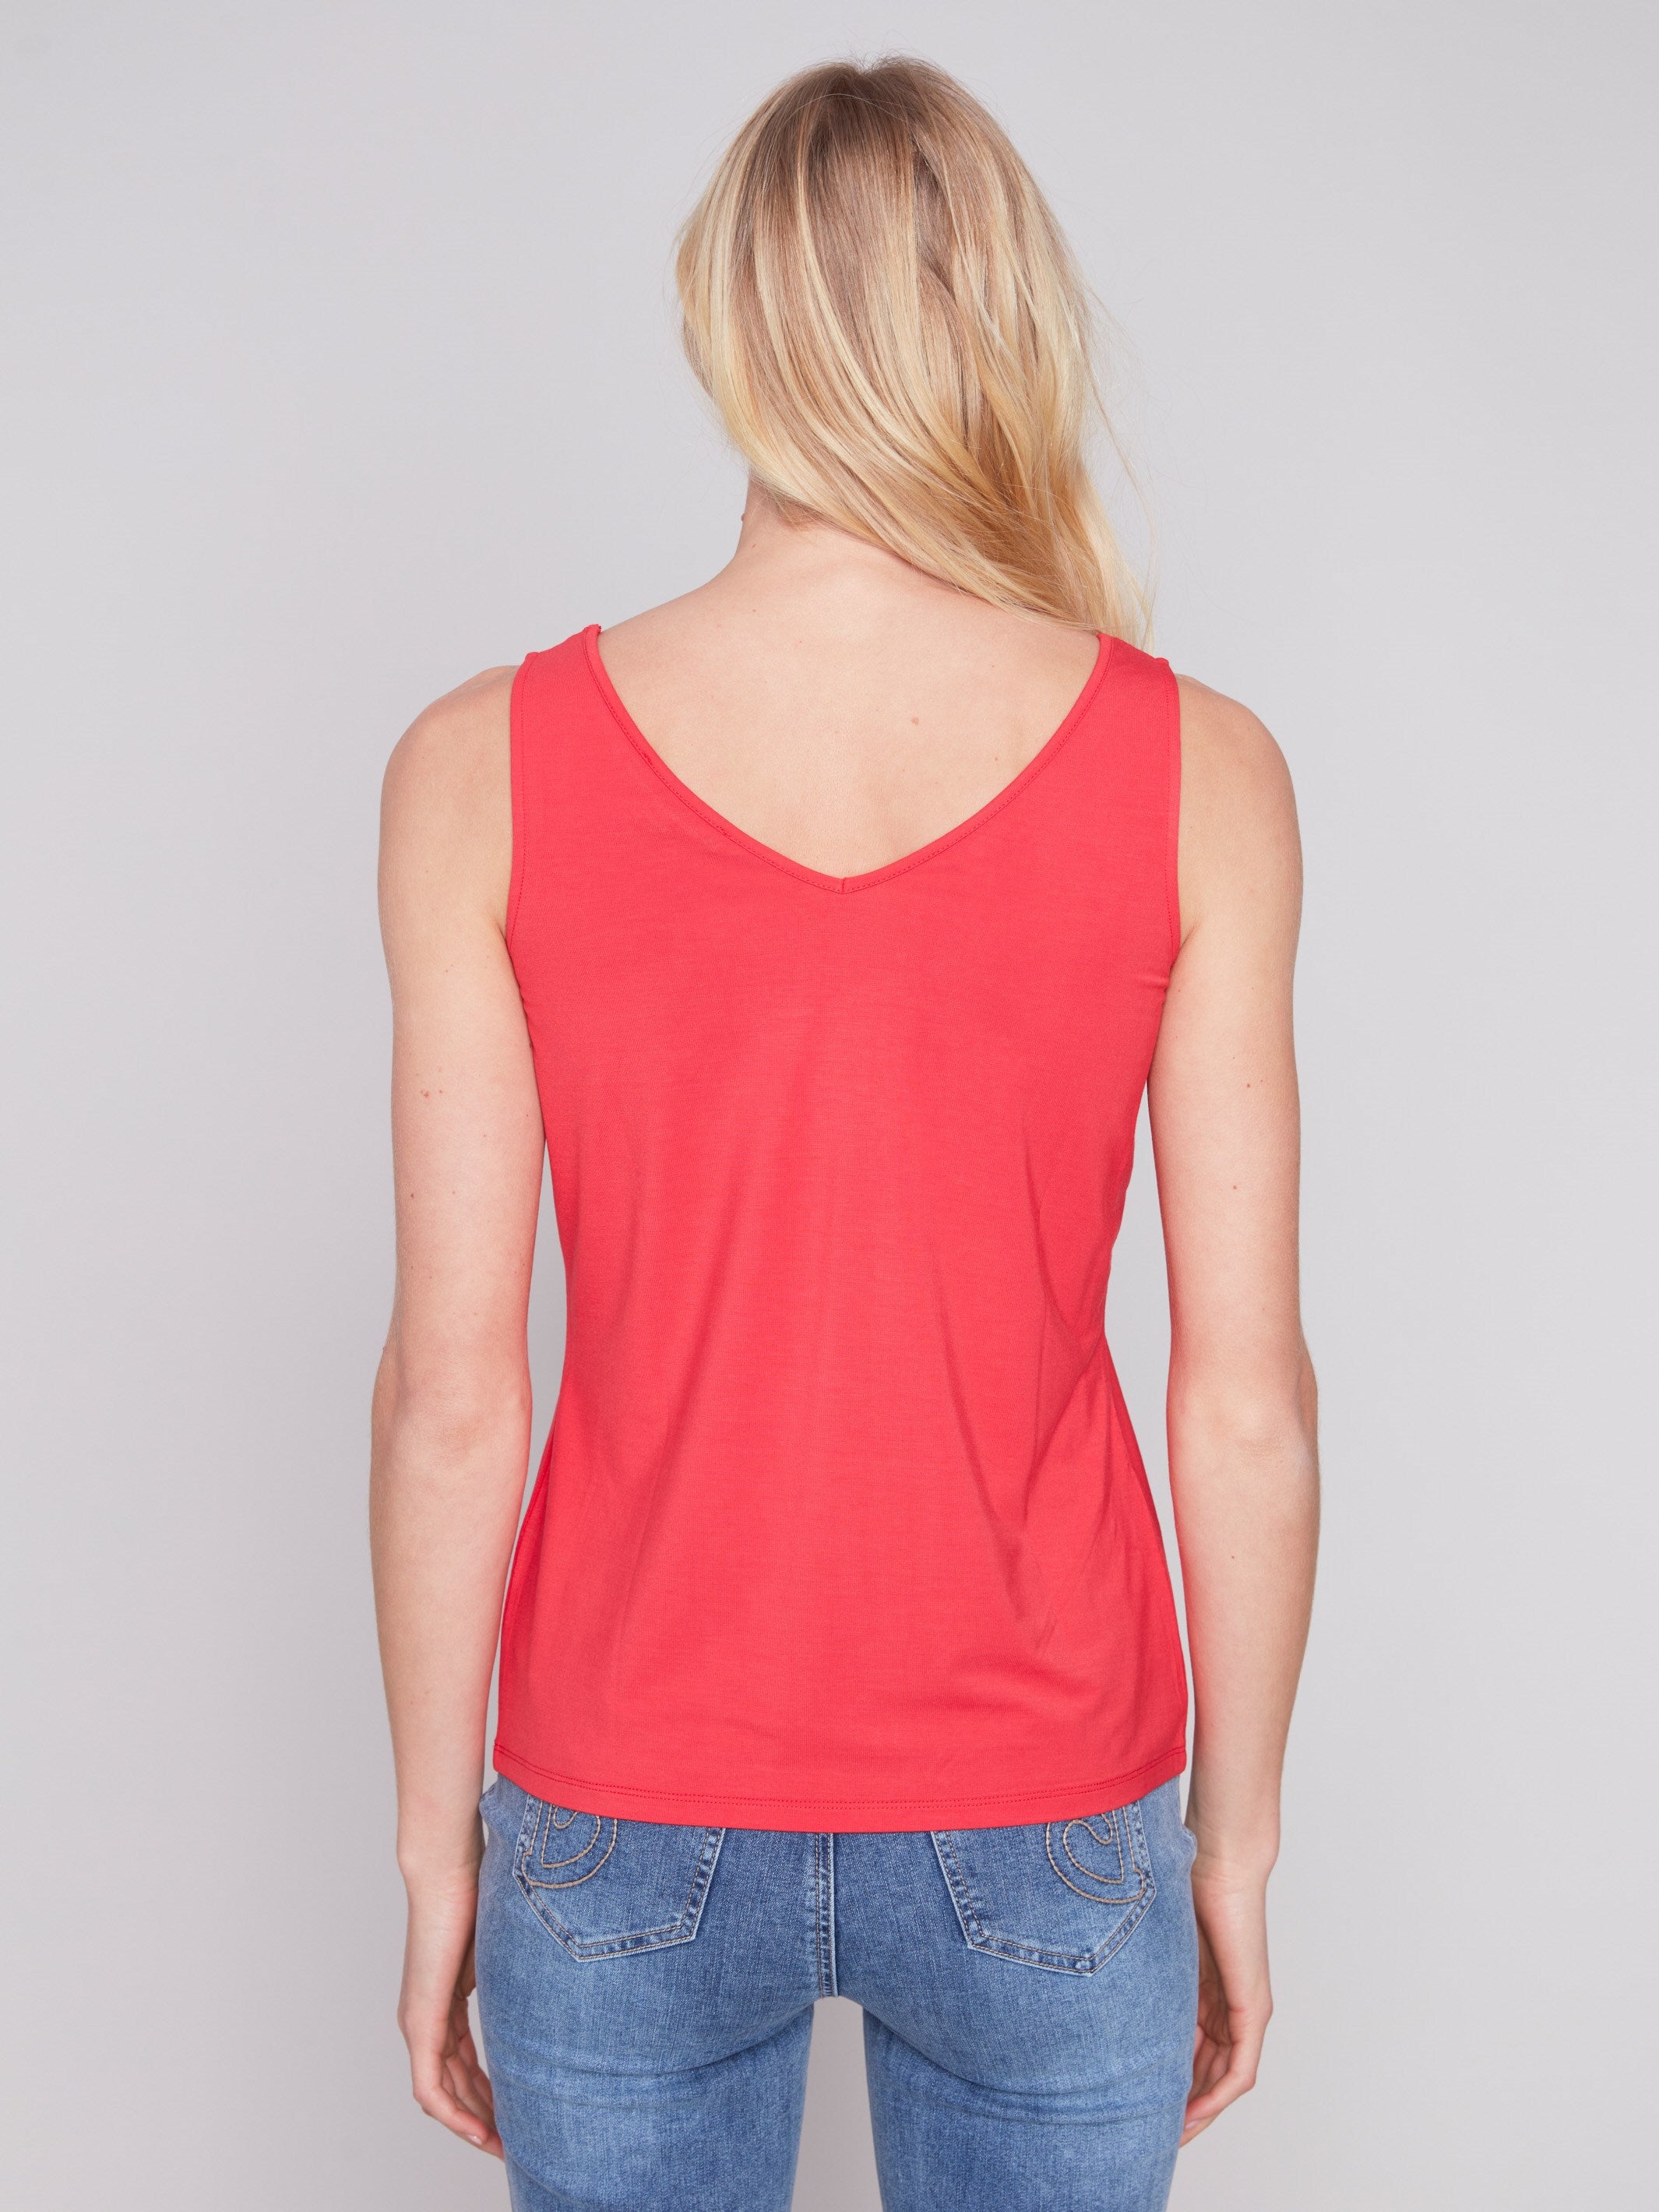 Reversible Bamboo Cami - Cherry - Charlie B Collection Canada - Image 2